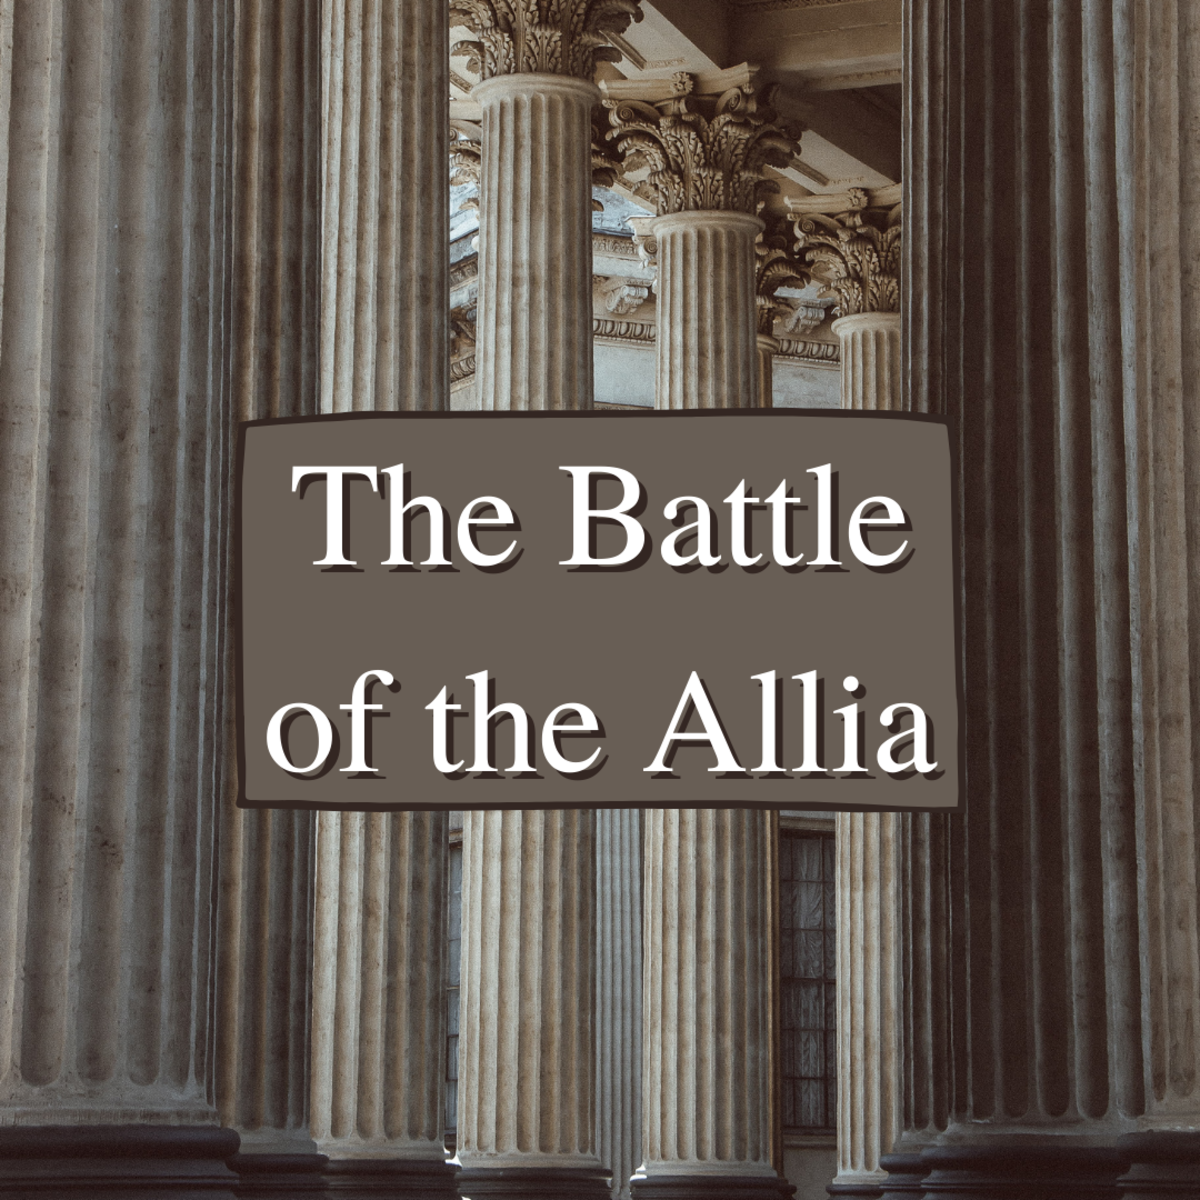 Read on to learn all about the Battle of the Allia and the ensuing sack of Rome. These events presaged Rome's later intense militarism throughout Italia.